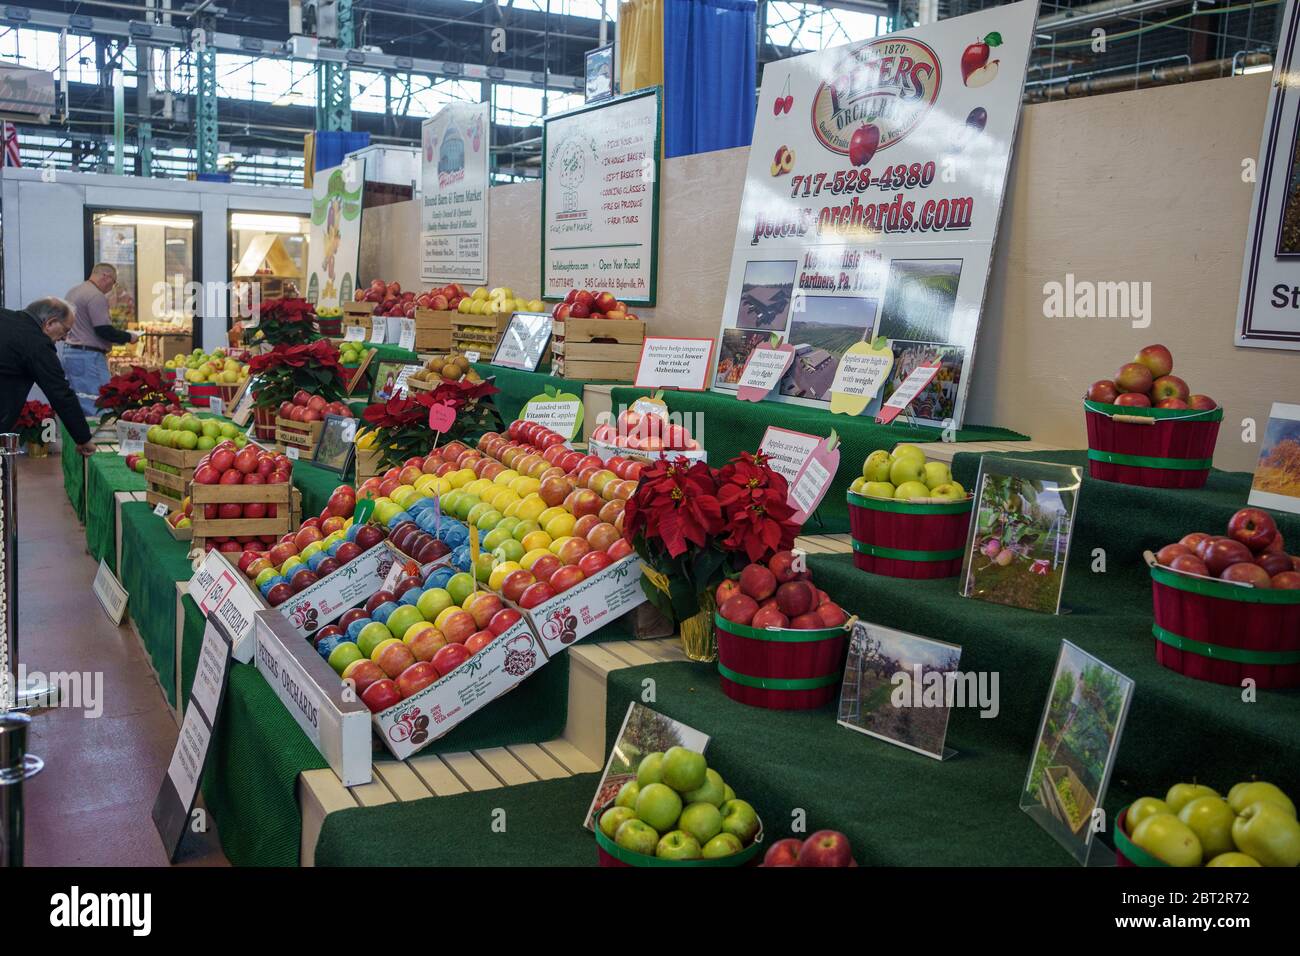 Harrisburg, PA / USA - January 6, 2020: Fresh apples, one of Pernnsylvania’s large agricultural crops, are on display at the annual PA Farm Show. Stock Photo